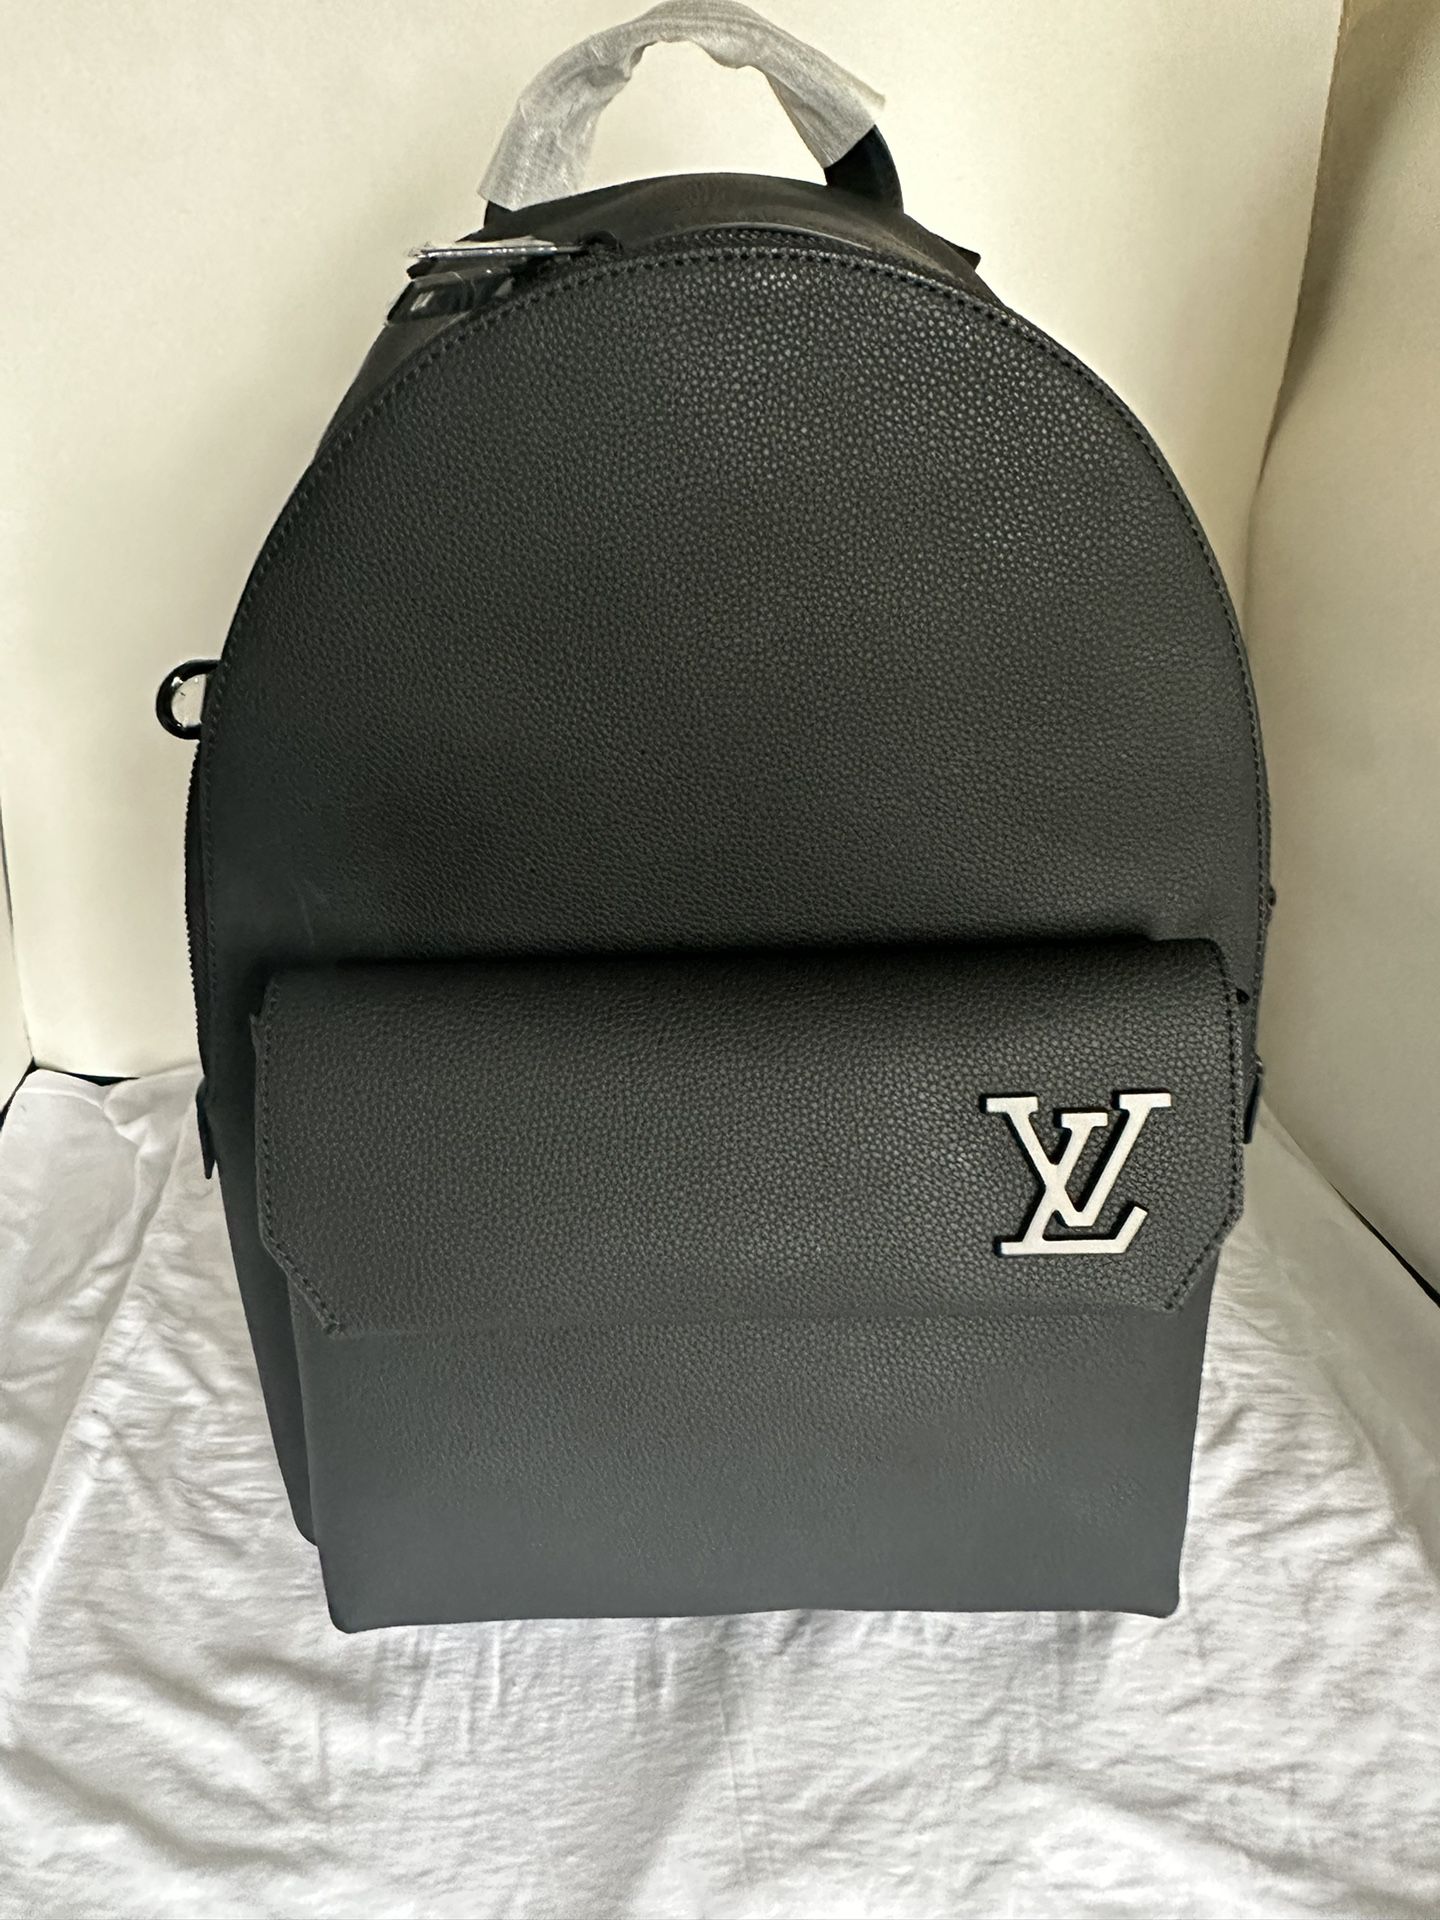 Louis Vuitton Backpack for Sale in Jersey City, NJ - OfferUp